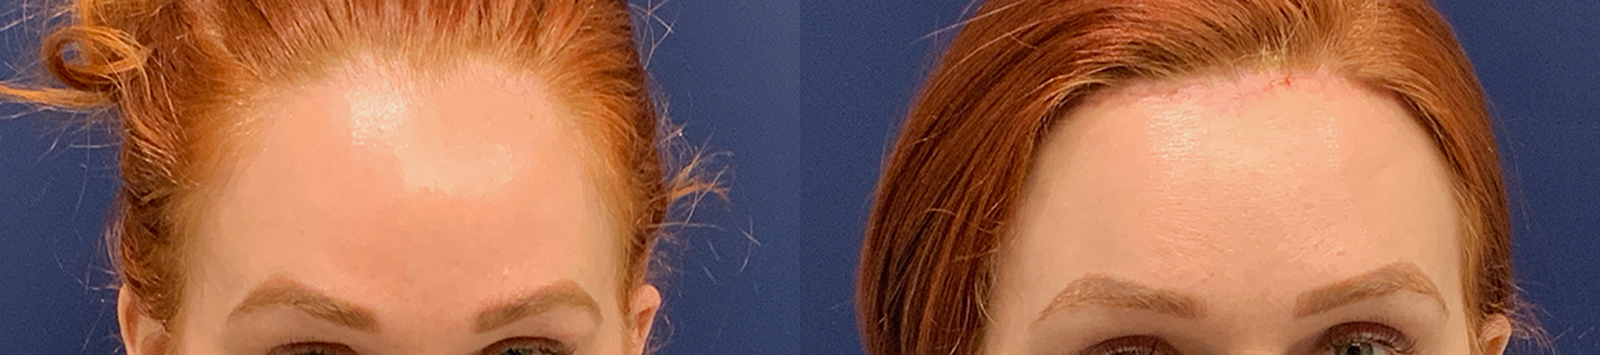 Brow Lift Before and After Photo by Dr. Leveque of Gulf Coast Plastic Surgery in Pensacola, FL